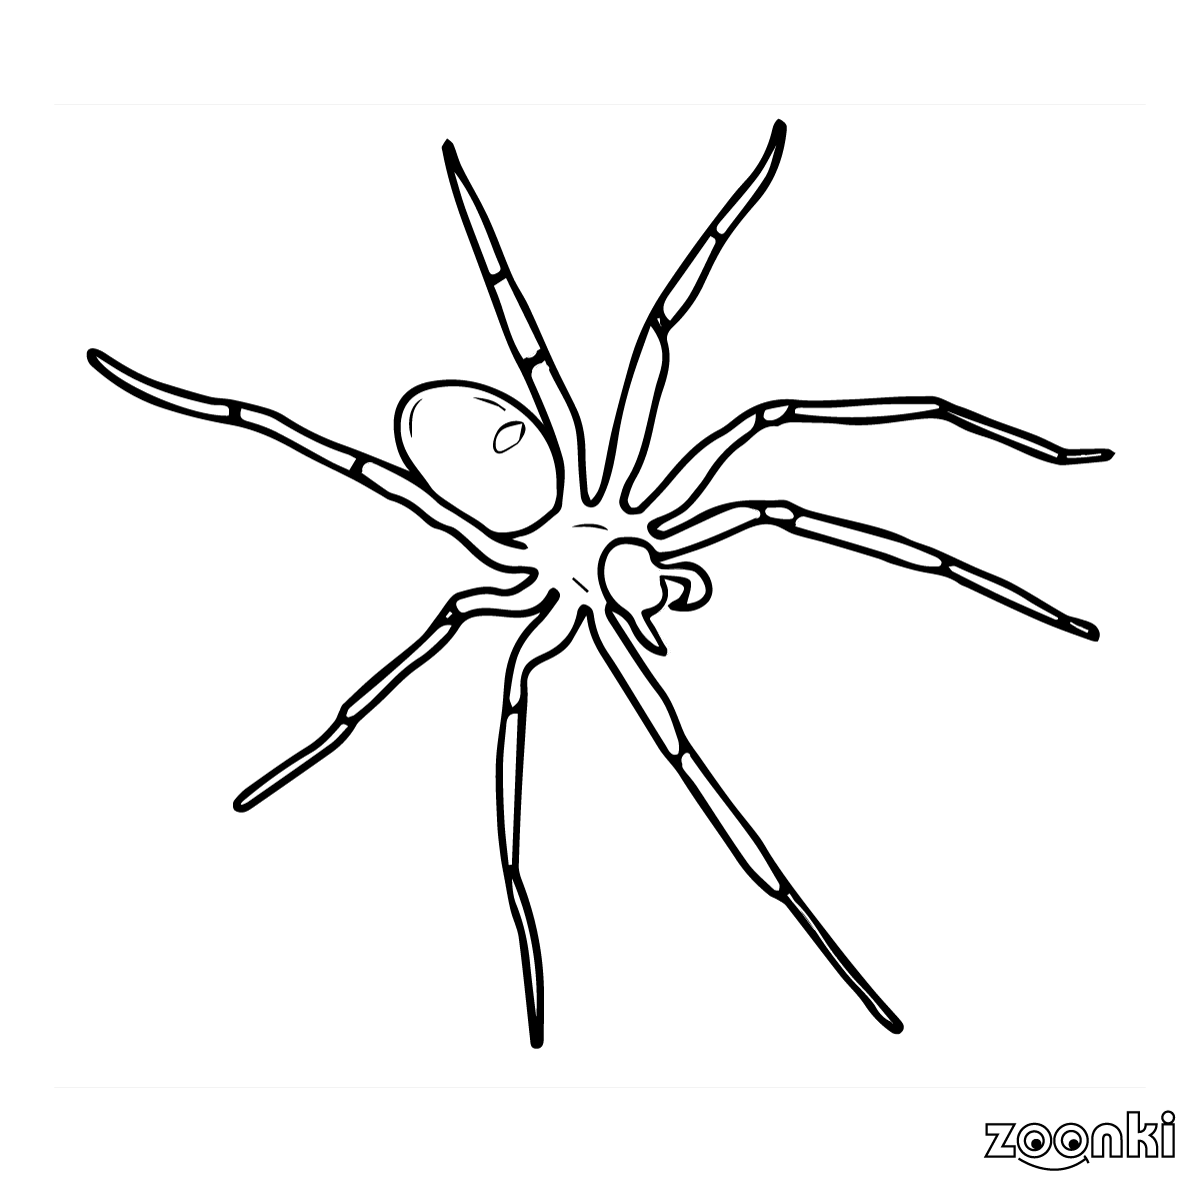 zoonki black & white spider for coloring